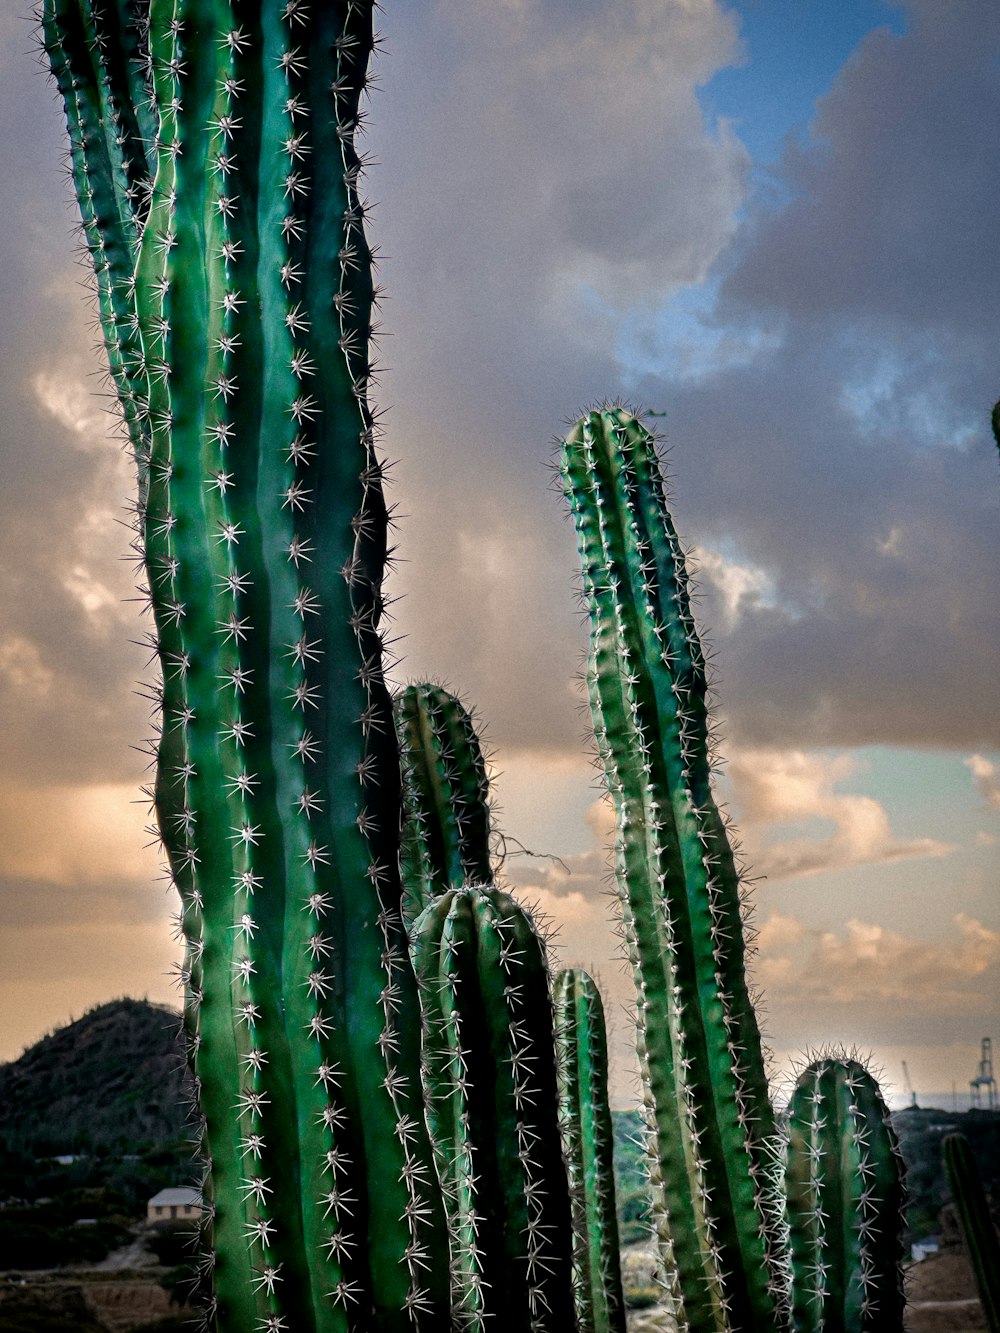 a large green cactus with a cloudy sky in the background